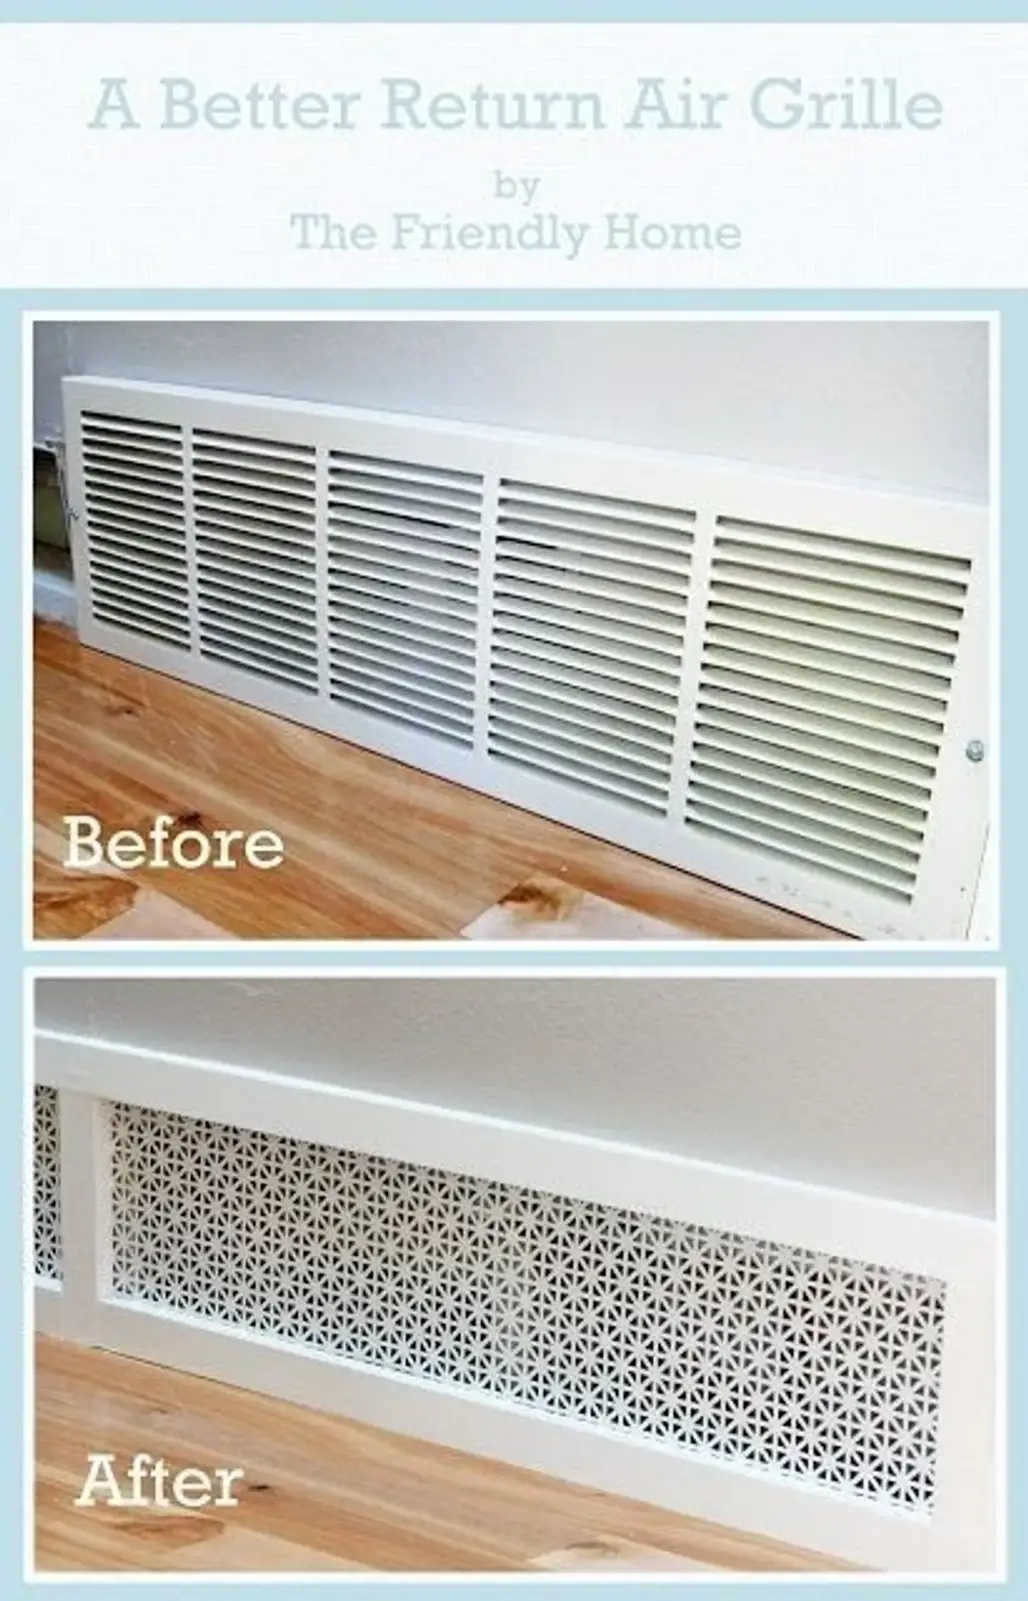 Replace Air Vents with Sheet Metal from the Hardware Store